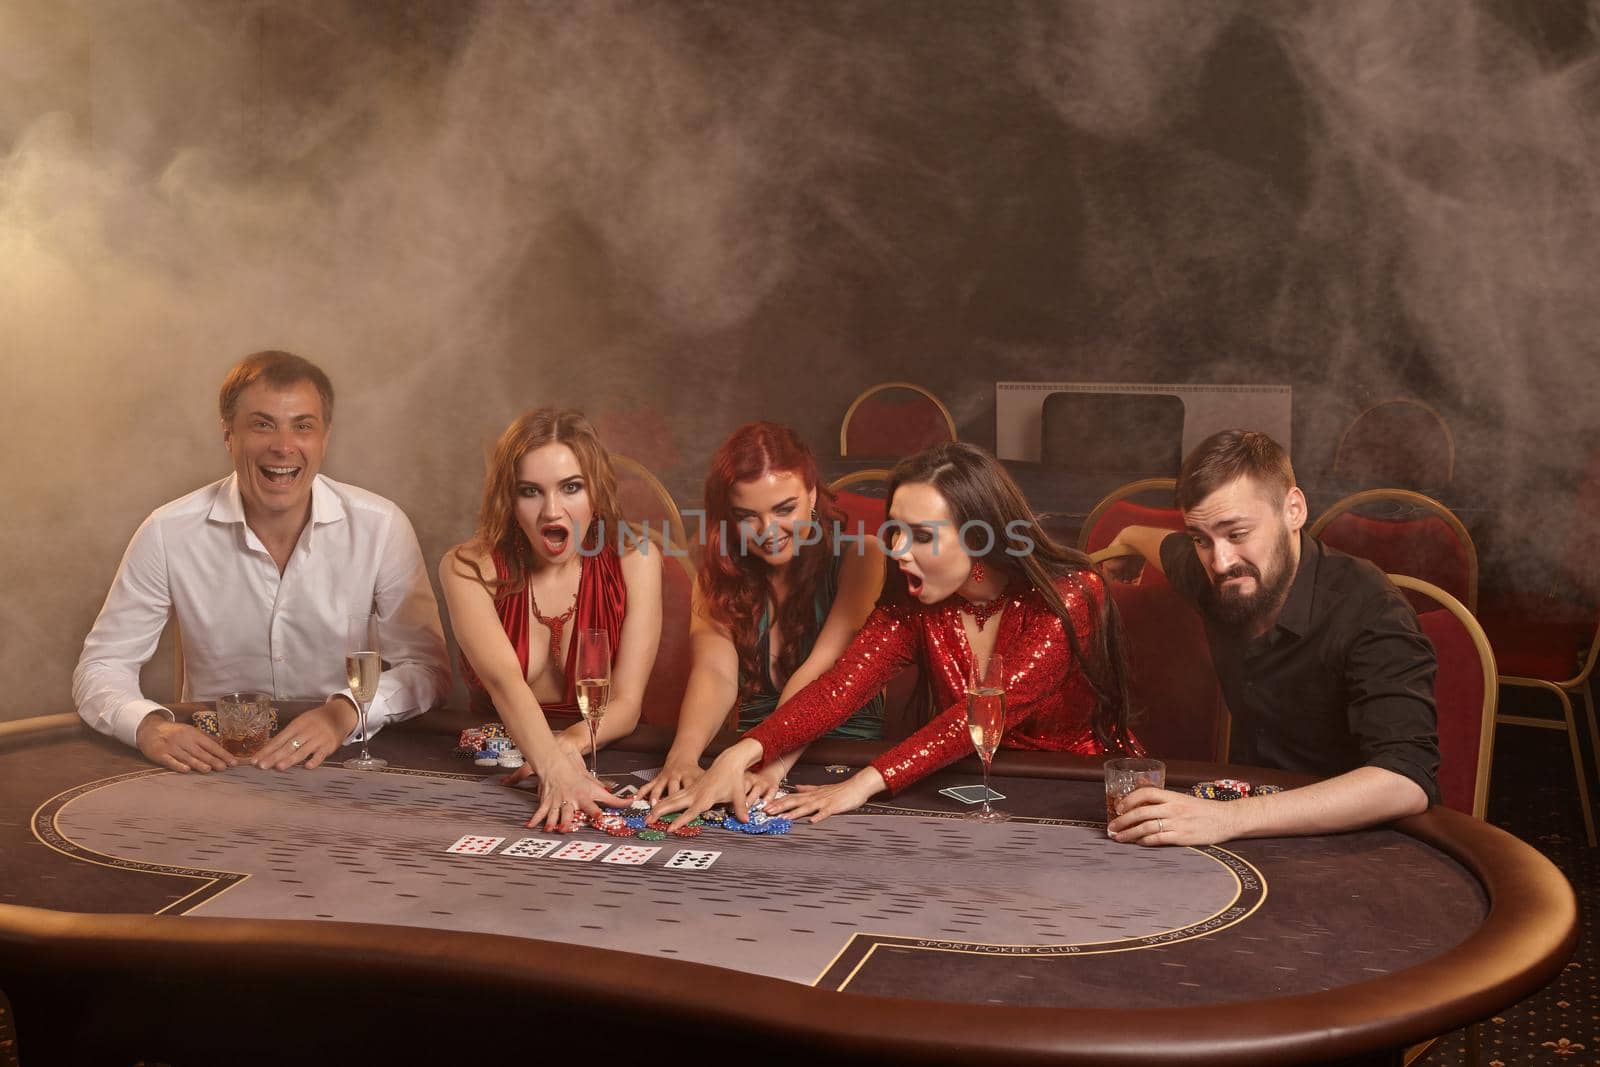 Cheerful partners are playing poker at casino. They are celebrating their win, smiling and looking vey excited while posing sitting at the table against a dark smoke background in a ray of a spotlight. Cards, chips, money, alcohol, gambling, entertainment concept.